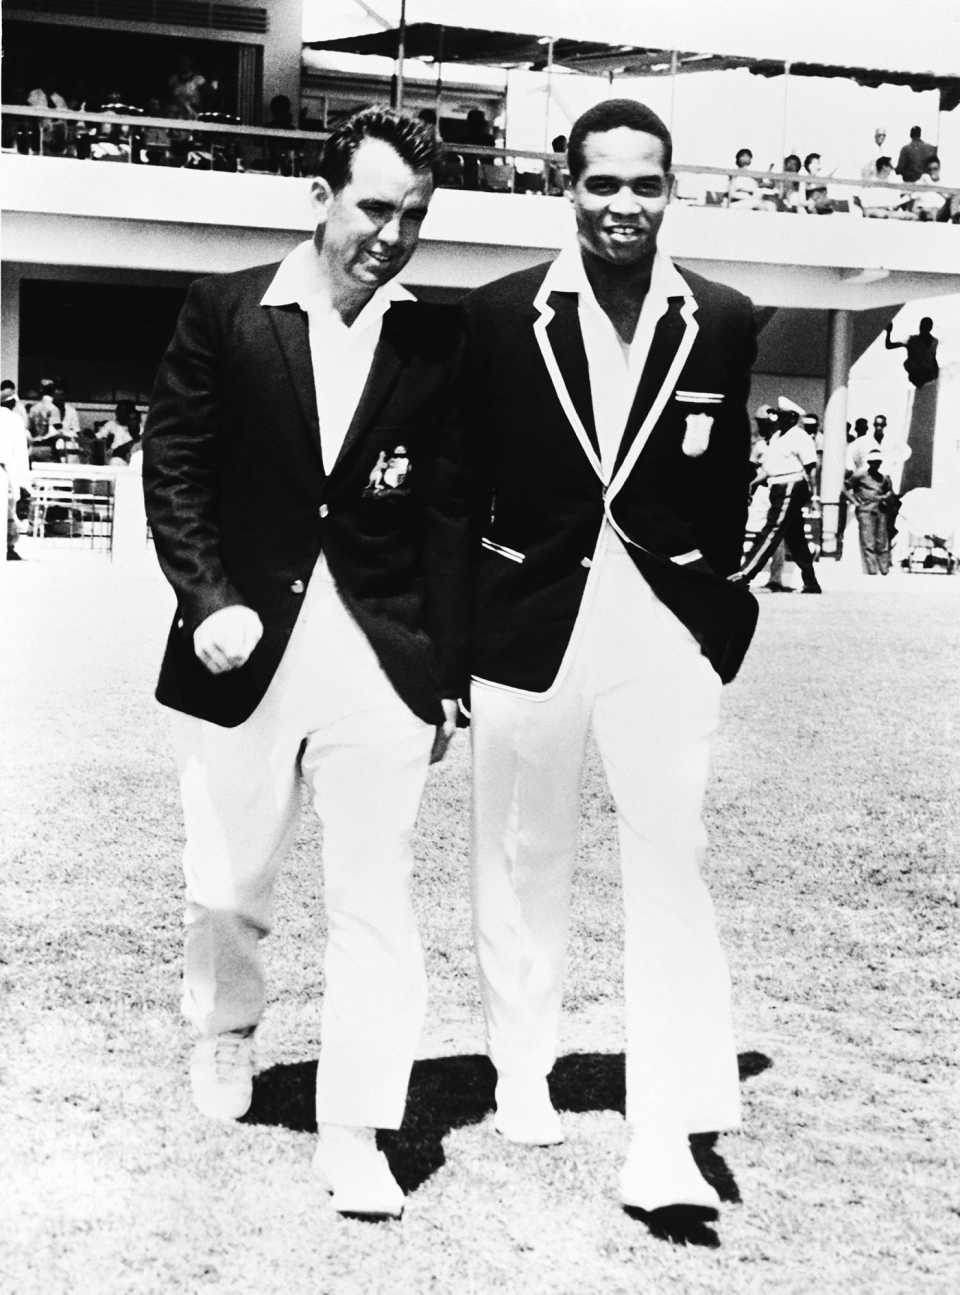 The two captains, Bob Simpson and Garry Sobers, walk out for the toss